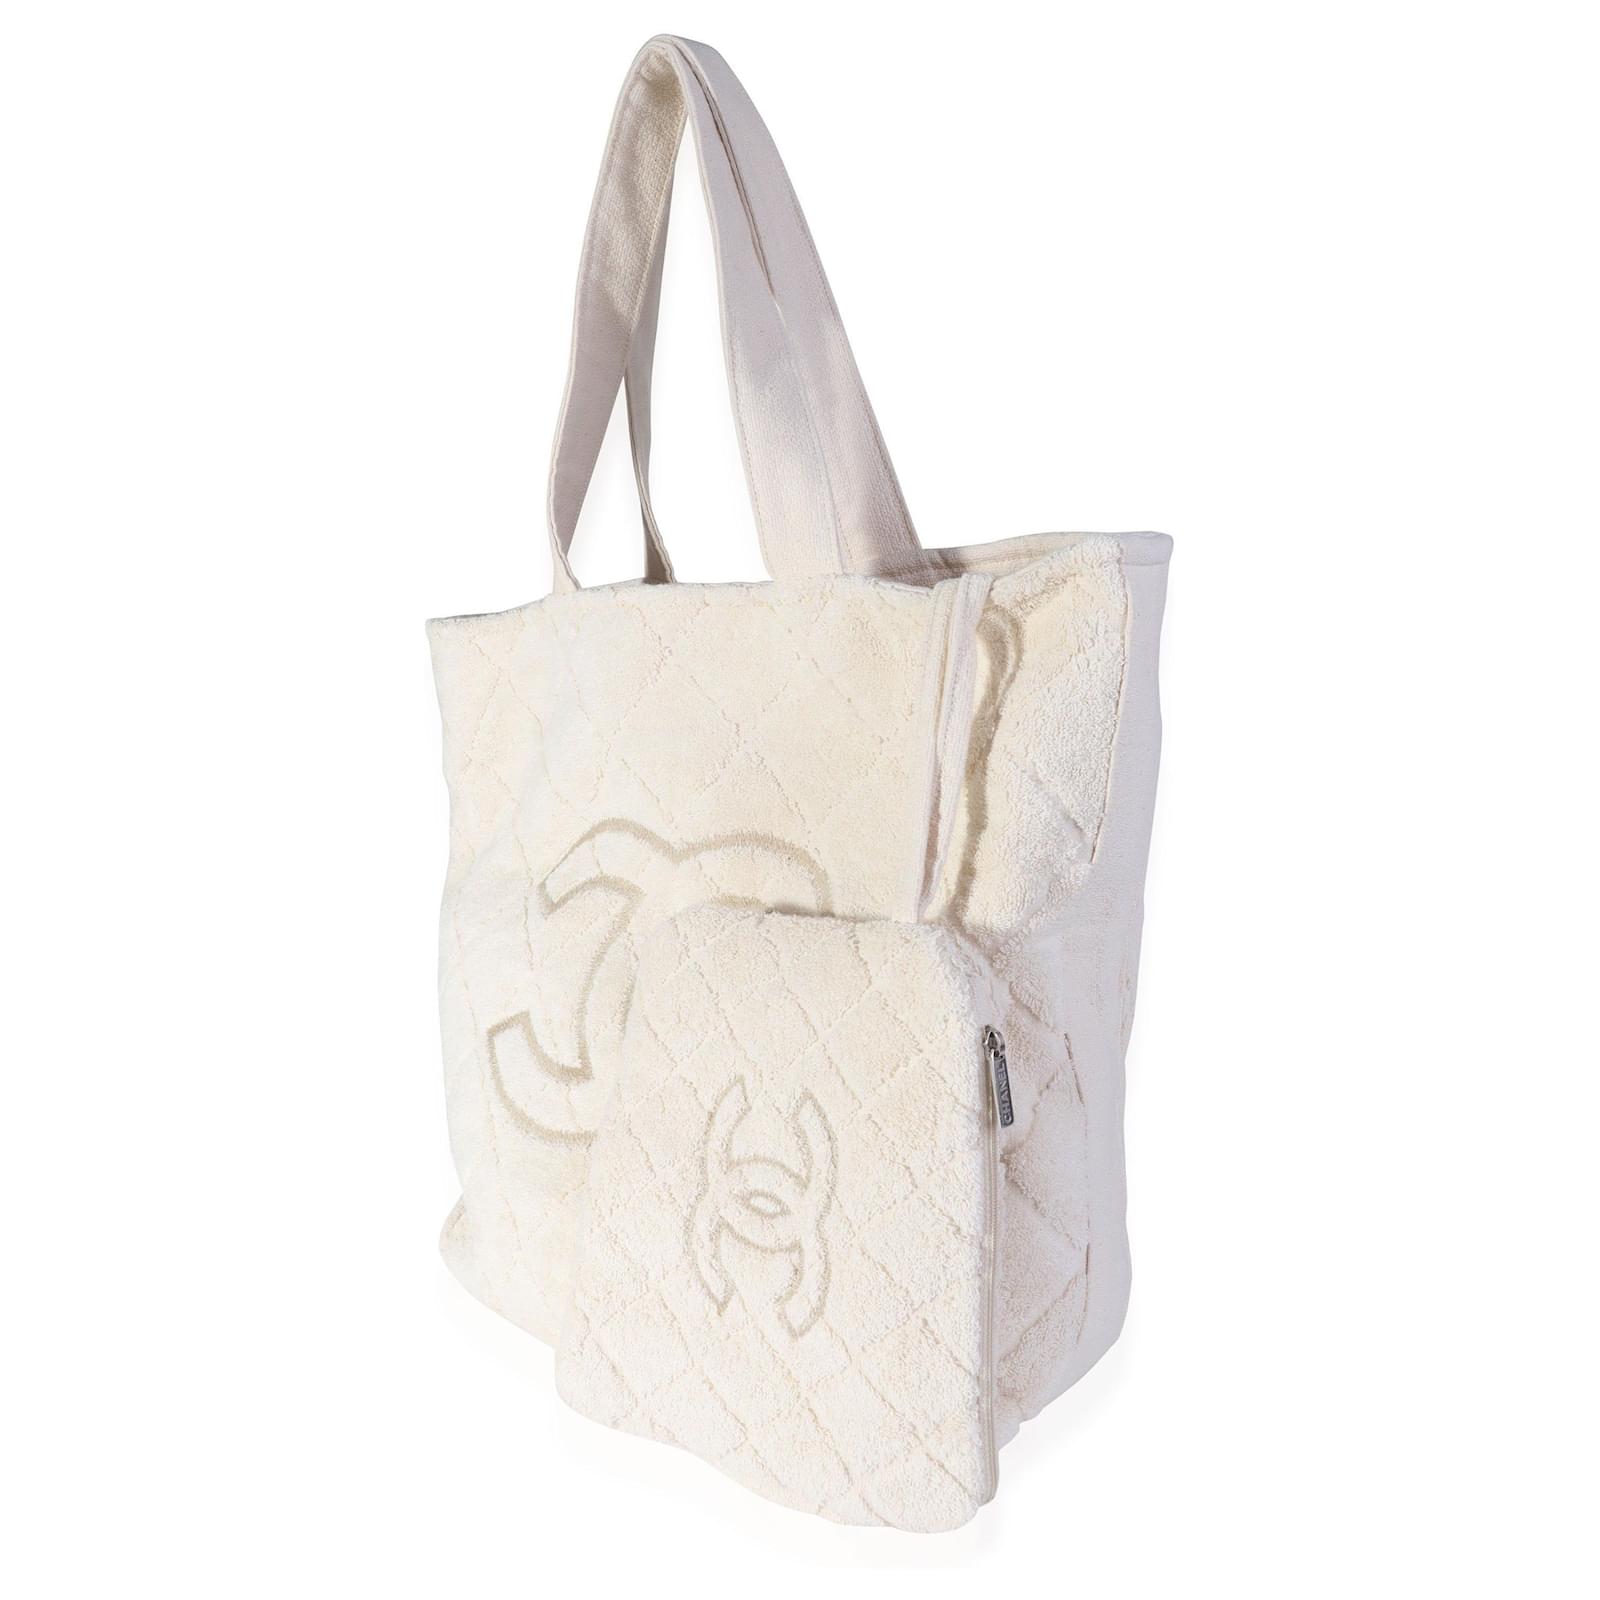 chanel terry cloth tote bag